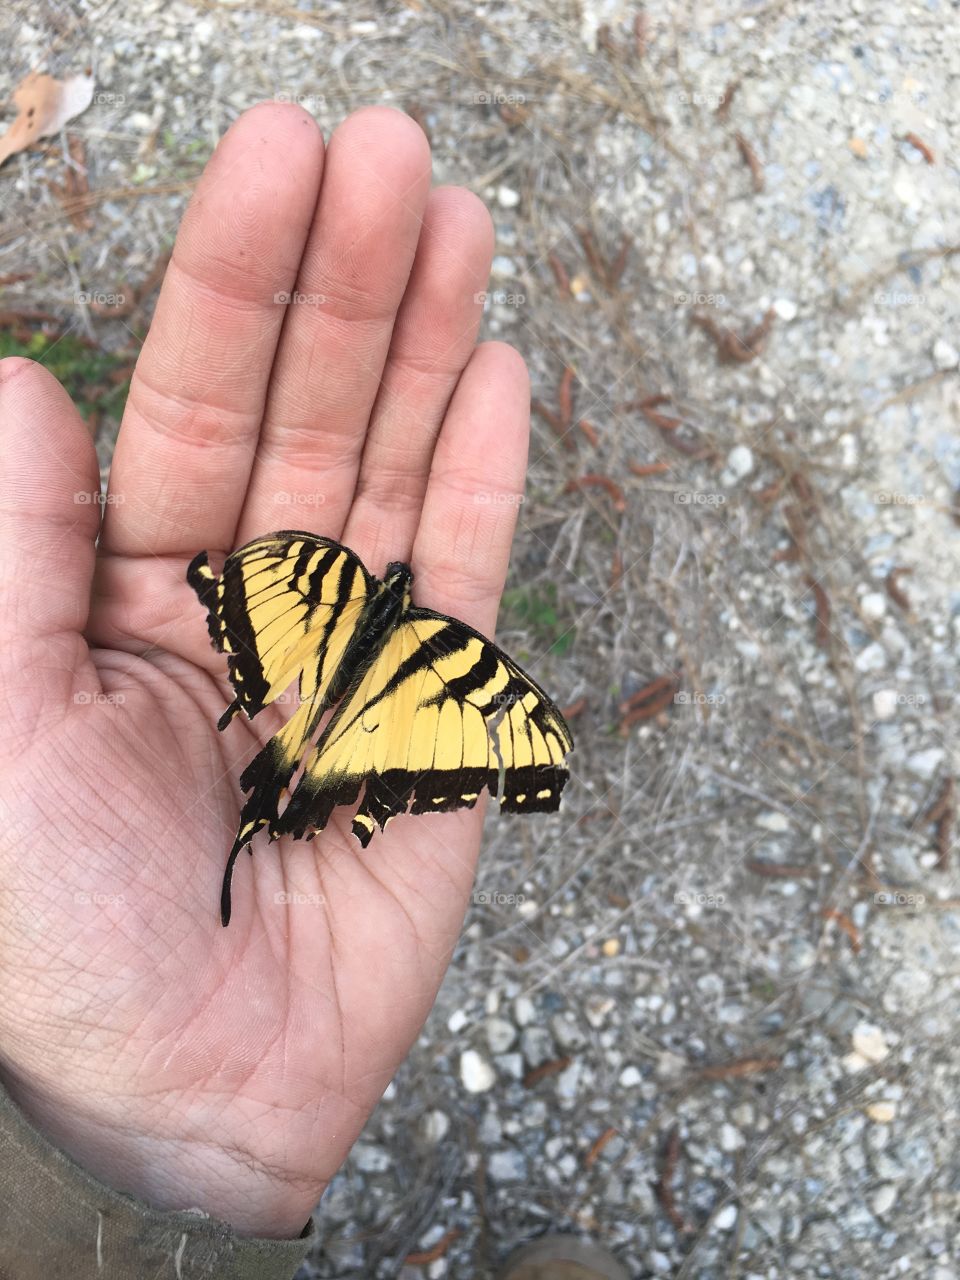 Swallowtail butterfly with torn wings